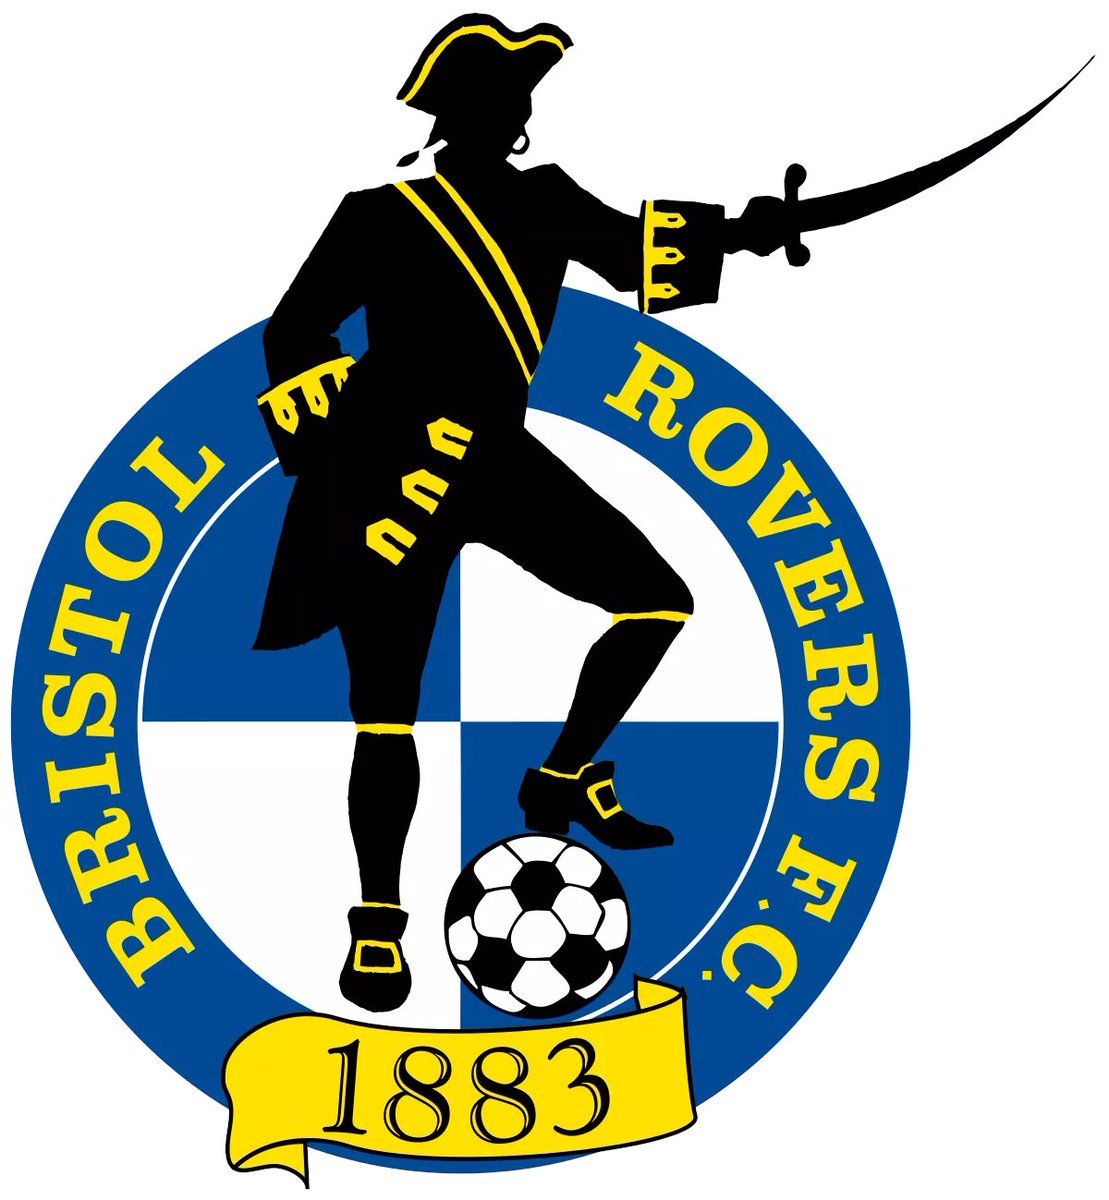 68) Bristol Rovers Points: 99 Manager: Ian Holloway!! I feel both Bristol teams would do a lot better if they just combined forces... but for some reason I feel like neither fans will be happy with that.